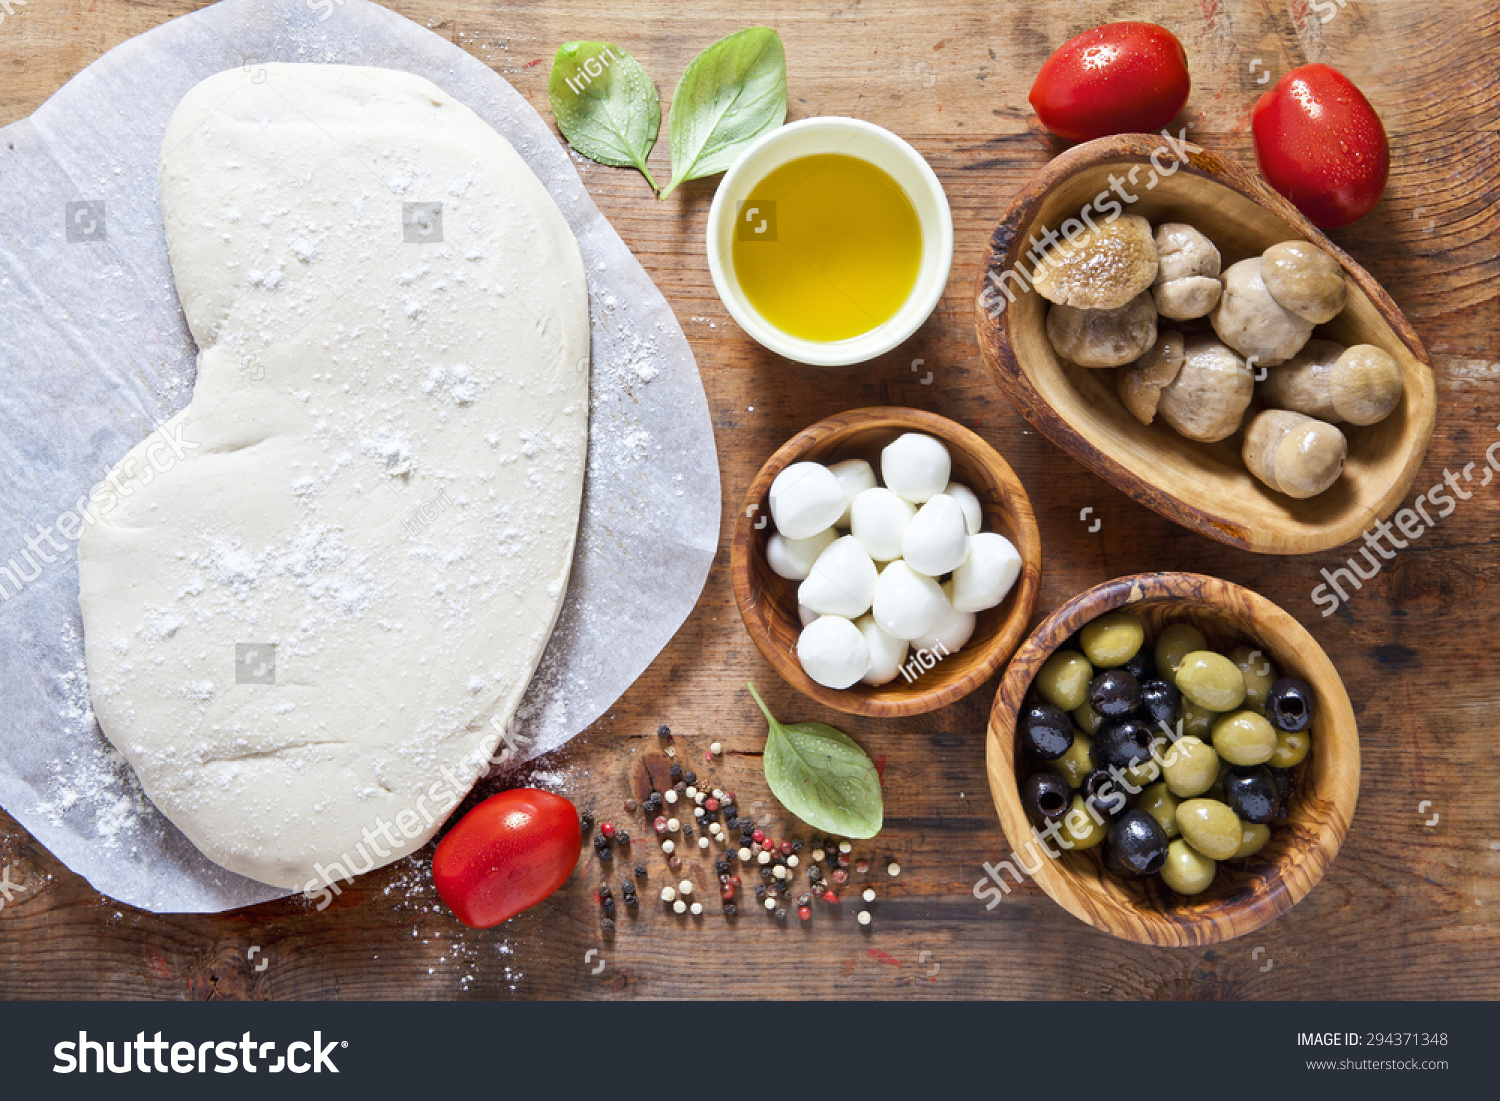 pizza dough and components for preparation homemade  hot rural health pizza. Food ingredients on the wooden background. small mozzarella, mushrooms, green and black olives #294371348